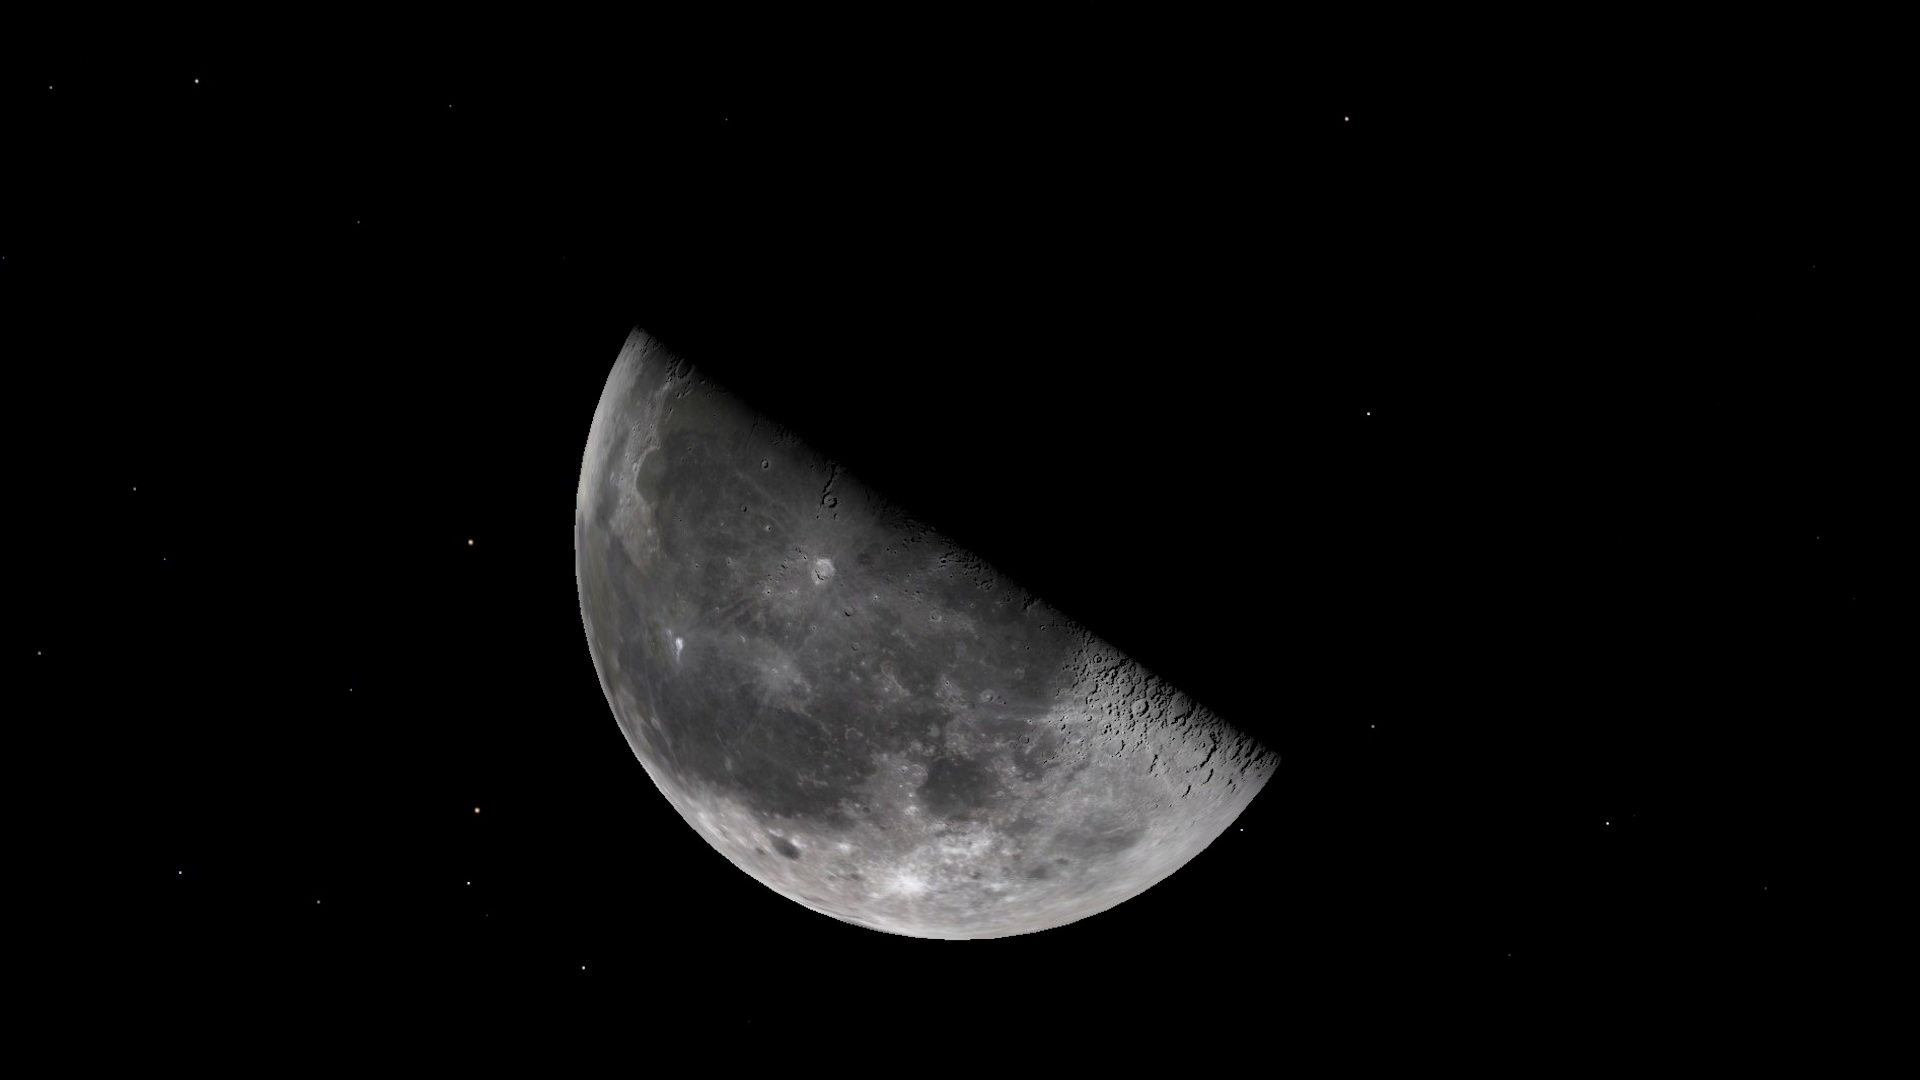 An illustration of the third quarter moon as it will appear on Dec. 16.